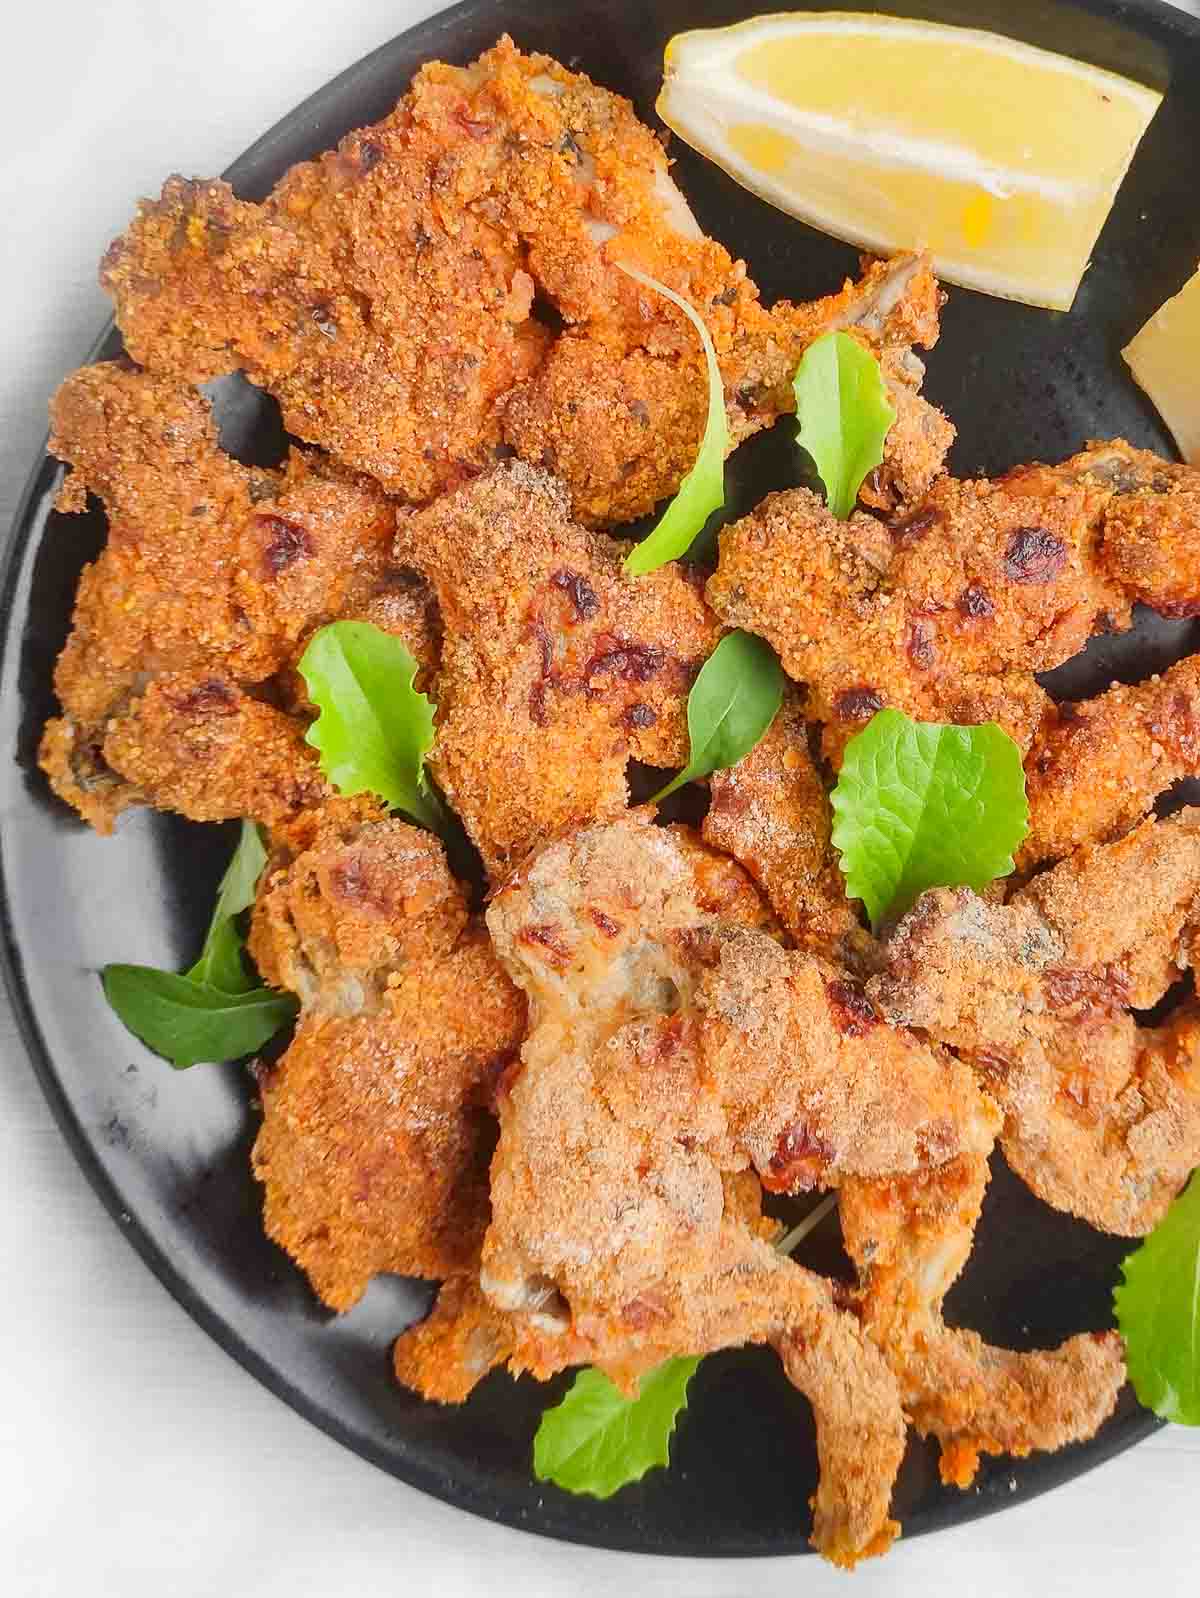 Plate of crispy air fried frog legs with a lemon wedge